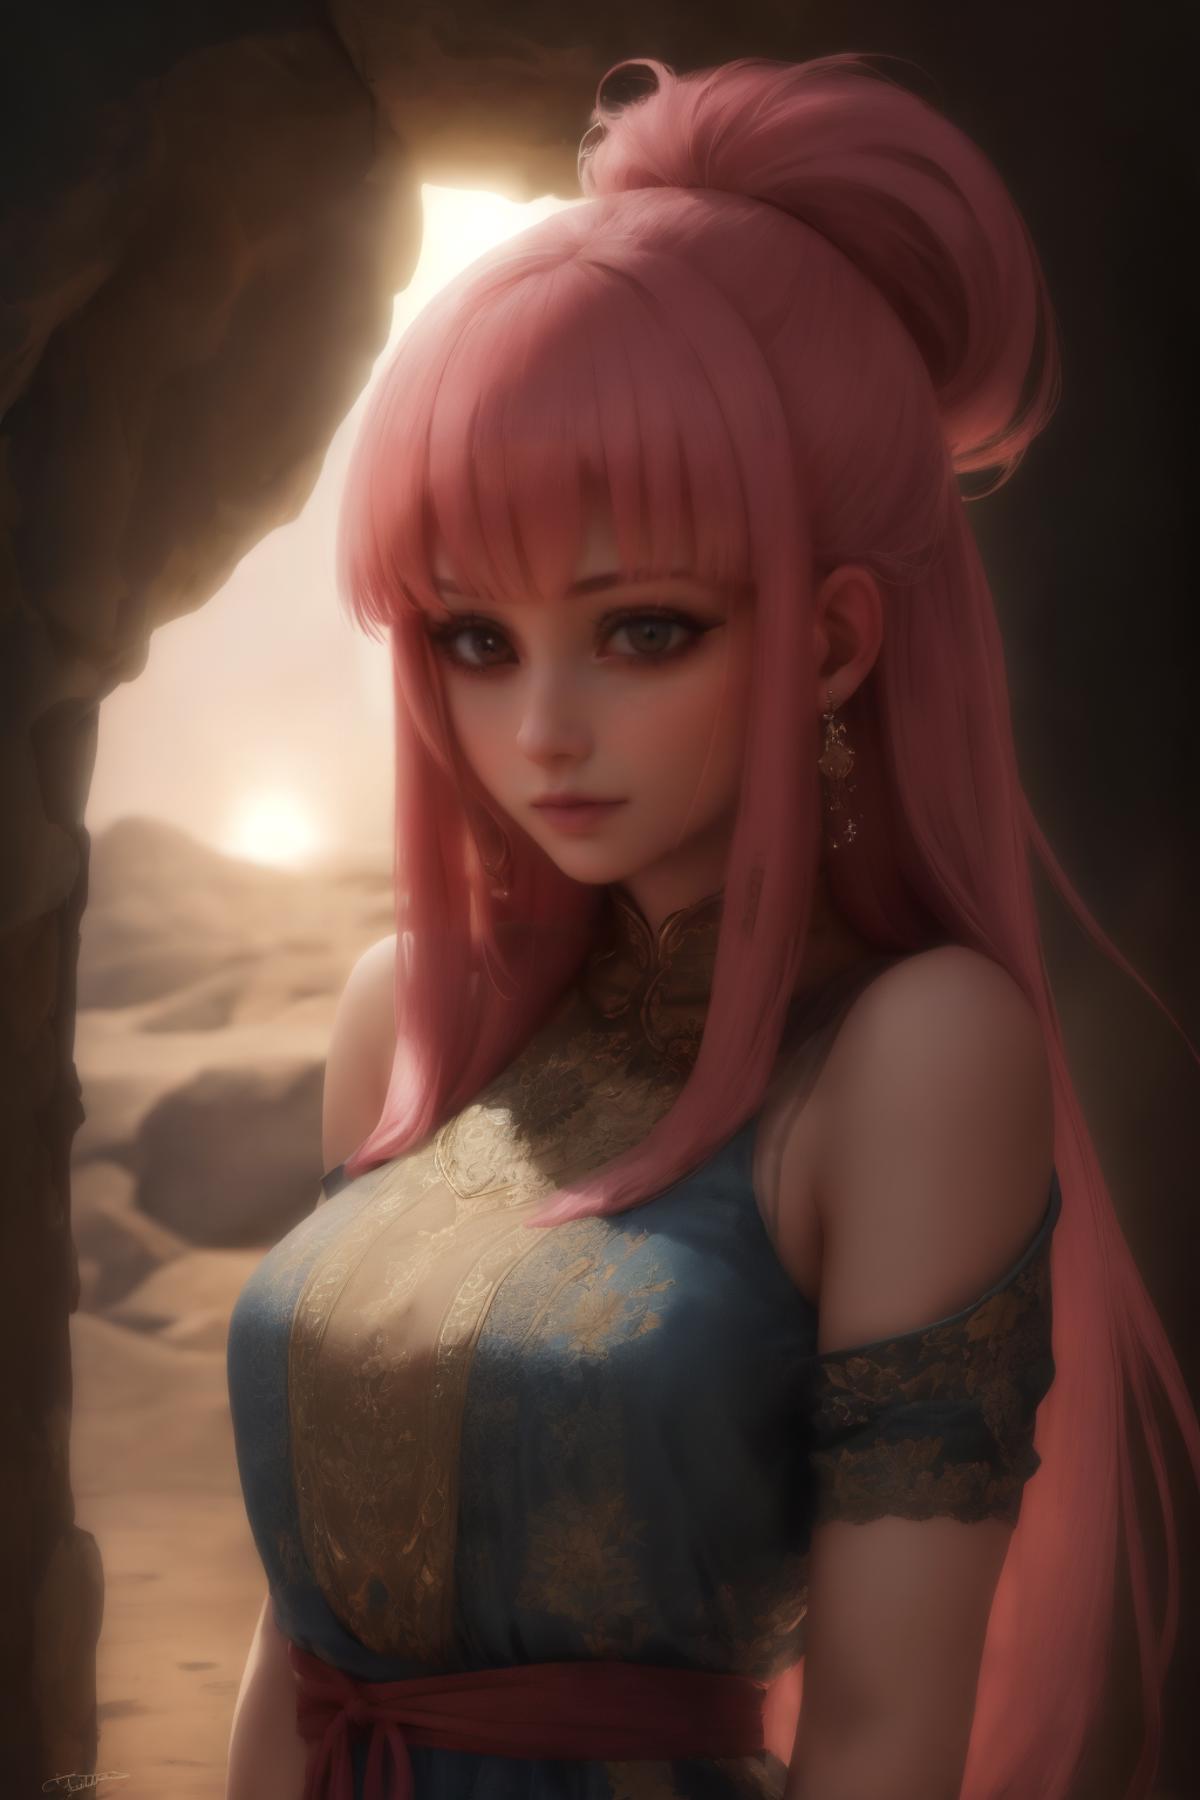 A beautiful pink-haired woman in a blue dress looking off into the distance.